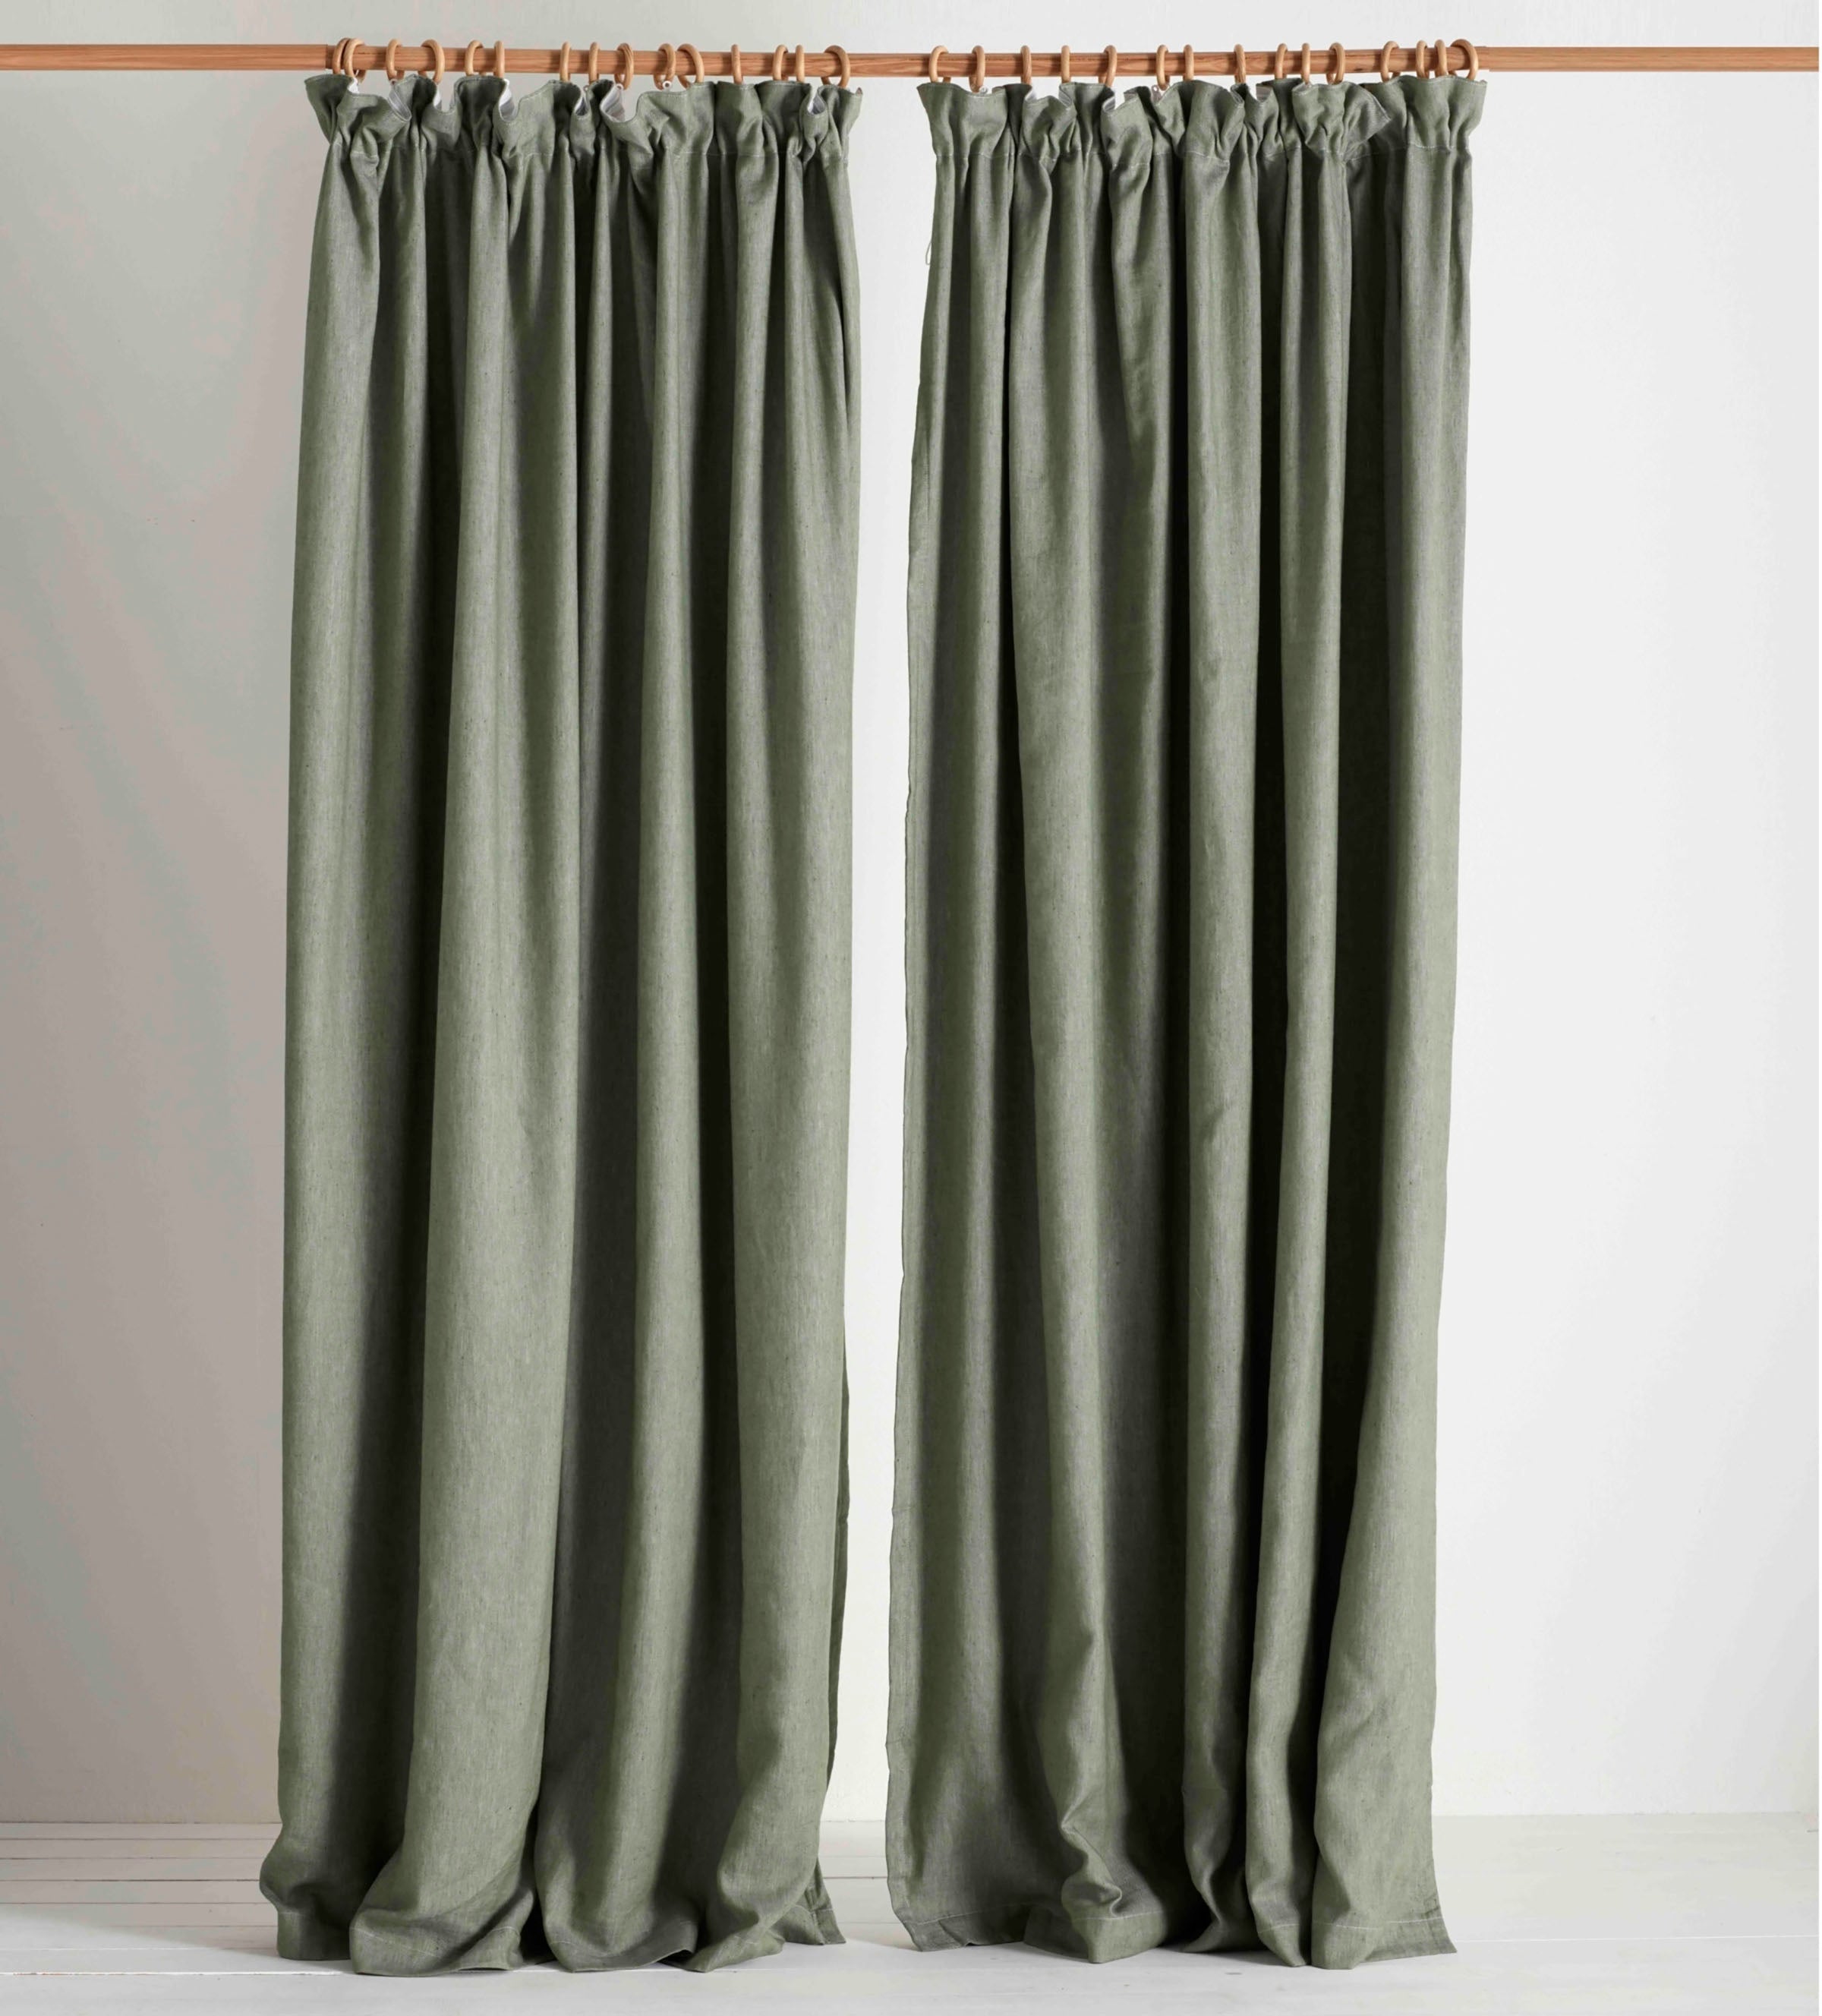 Olive Green Twill Cotton Linen Blackout Pencil Pleat Curtains (Pair)